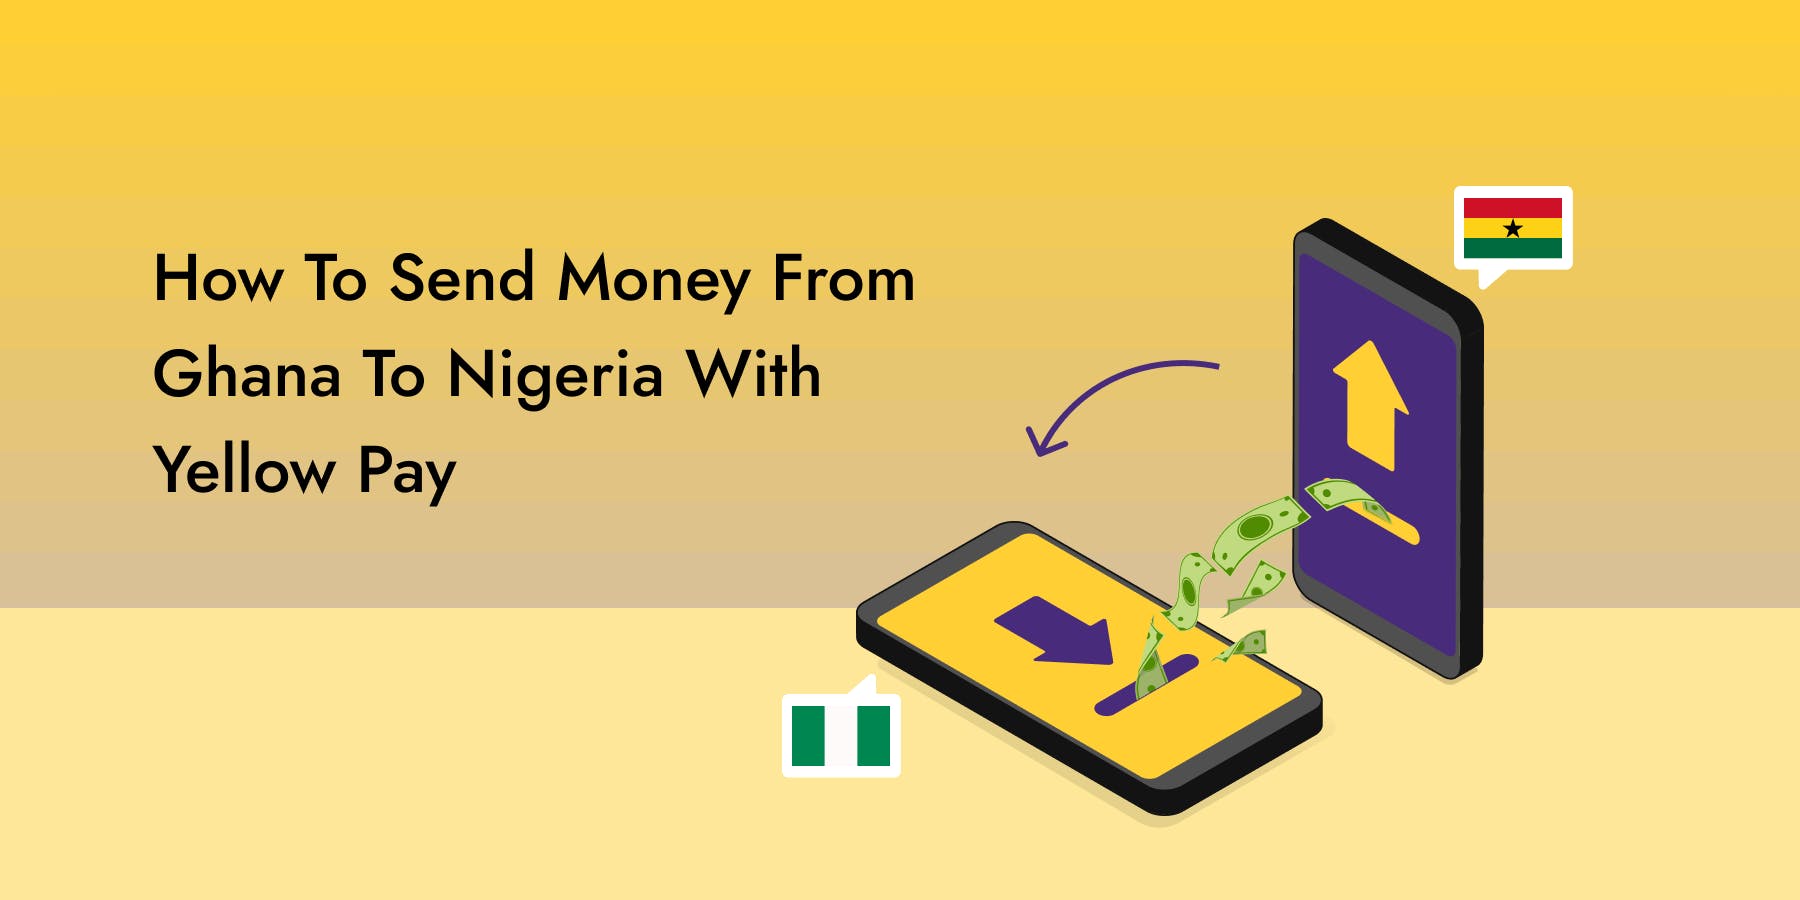 How to Send Money from Ghana to Nigeria With Yellow Pay